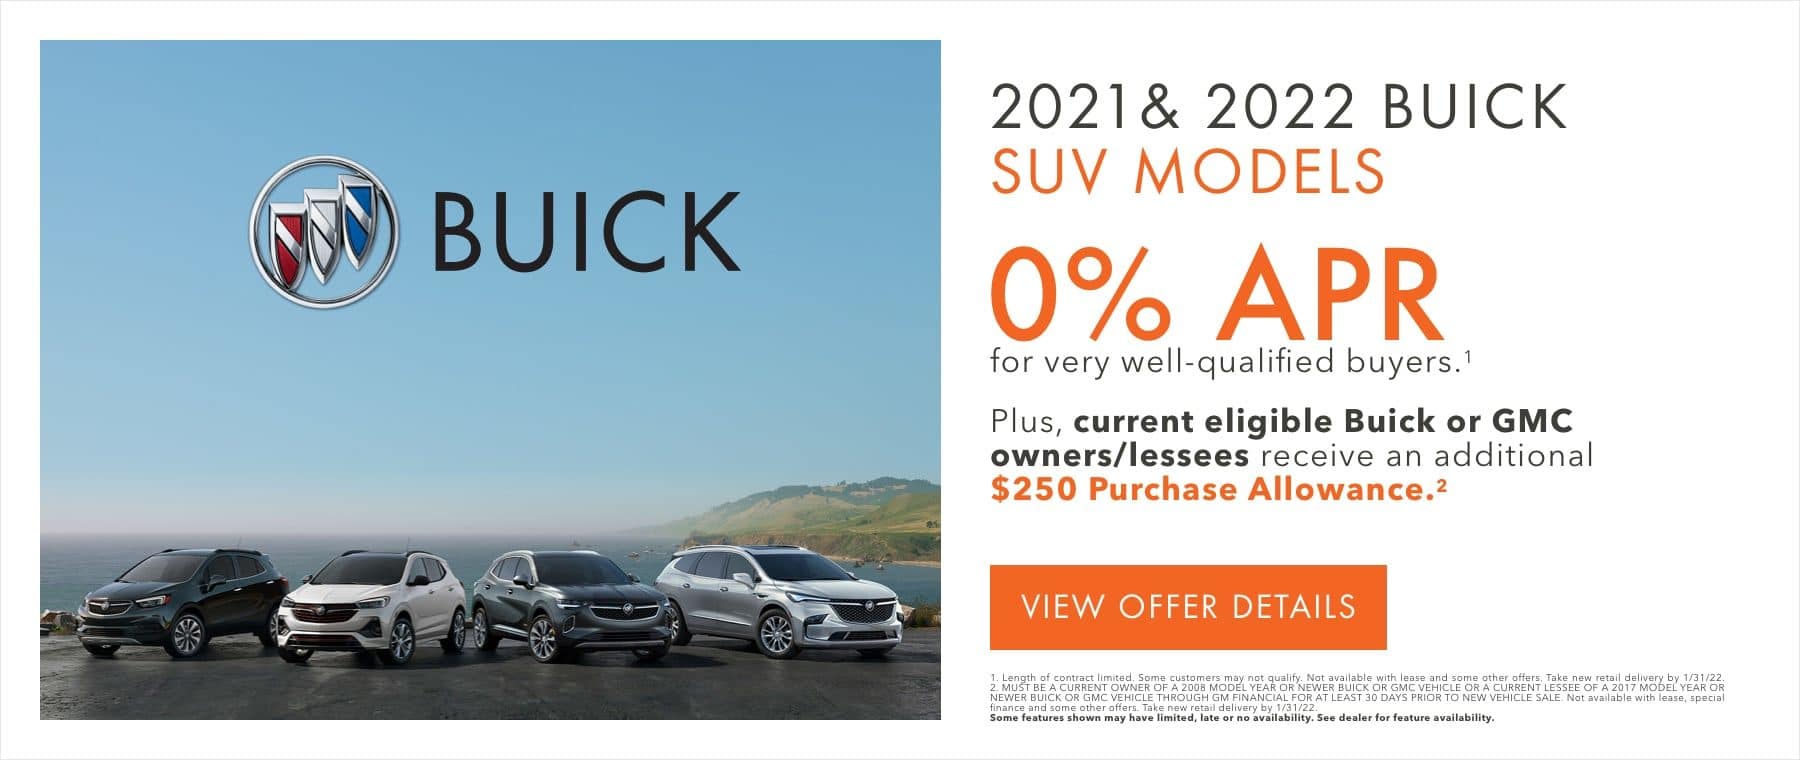 0% APR for very well-qualified buyers.1 Plus, current eligible Buick or GMC owners/lessees receive an additional $250 Purchase Allowance.2